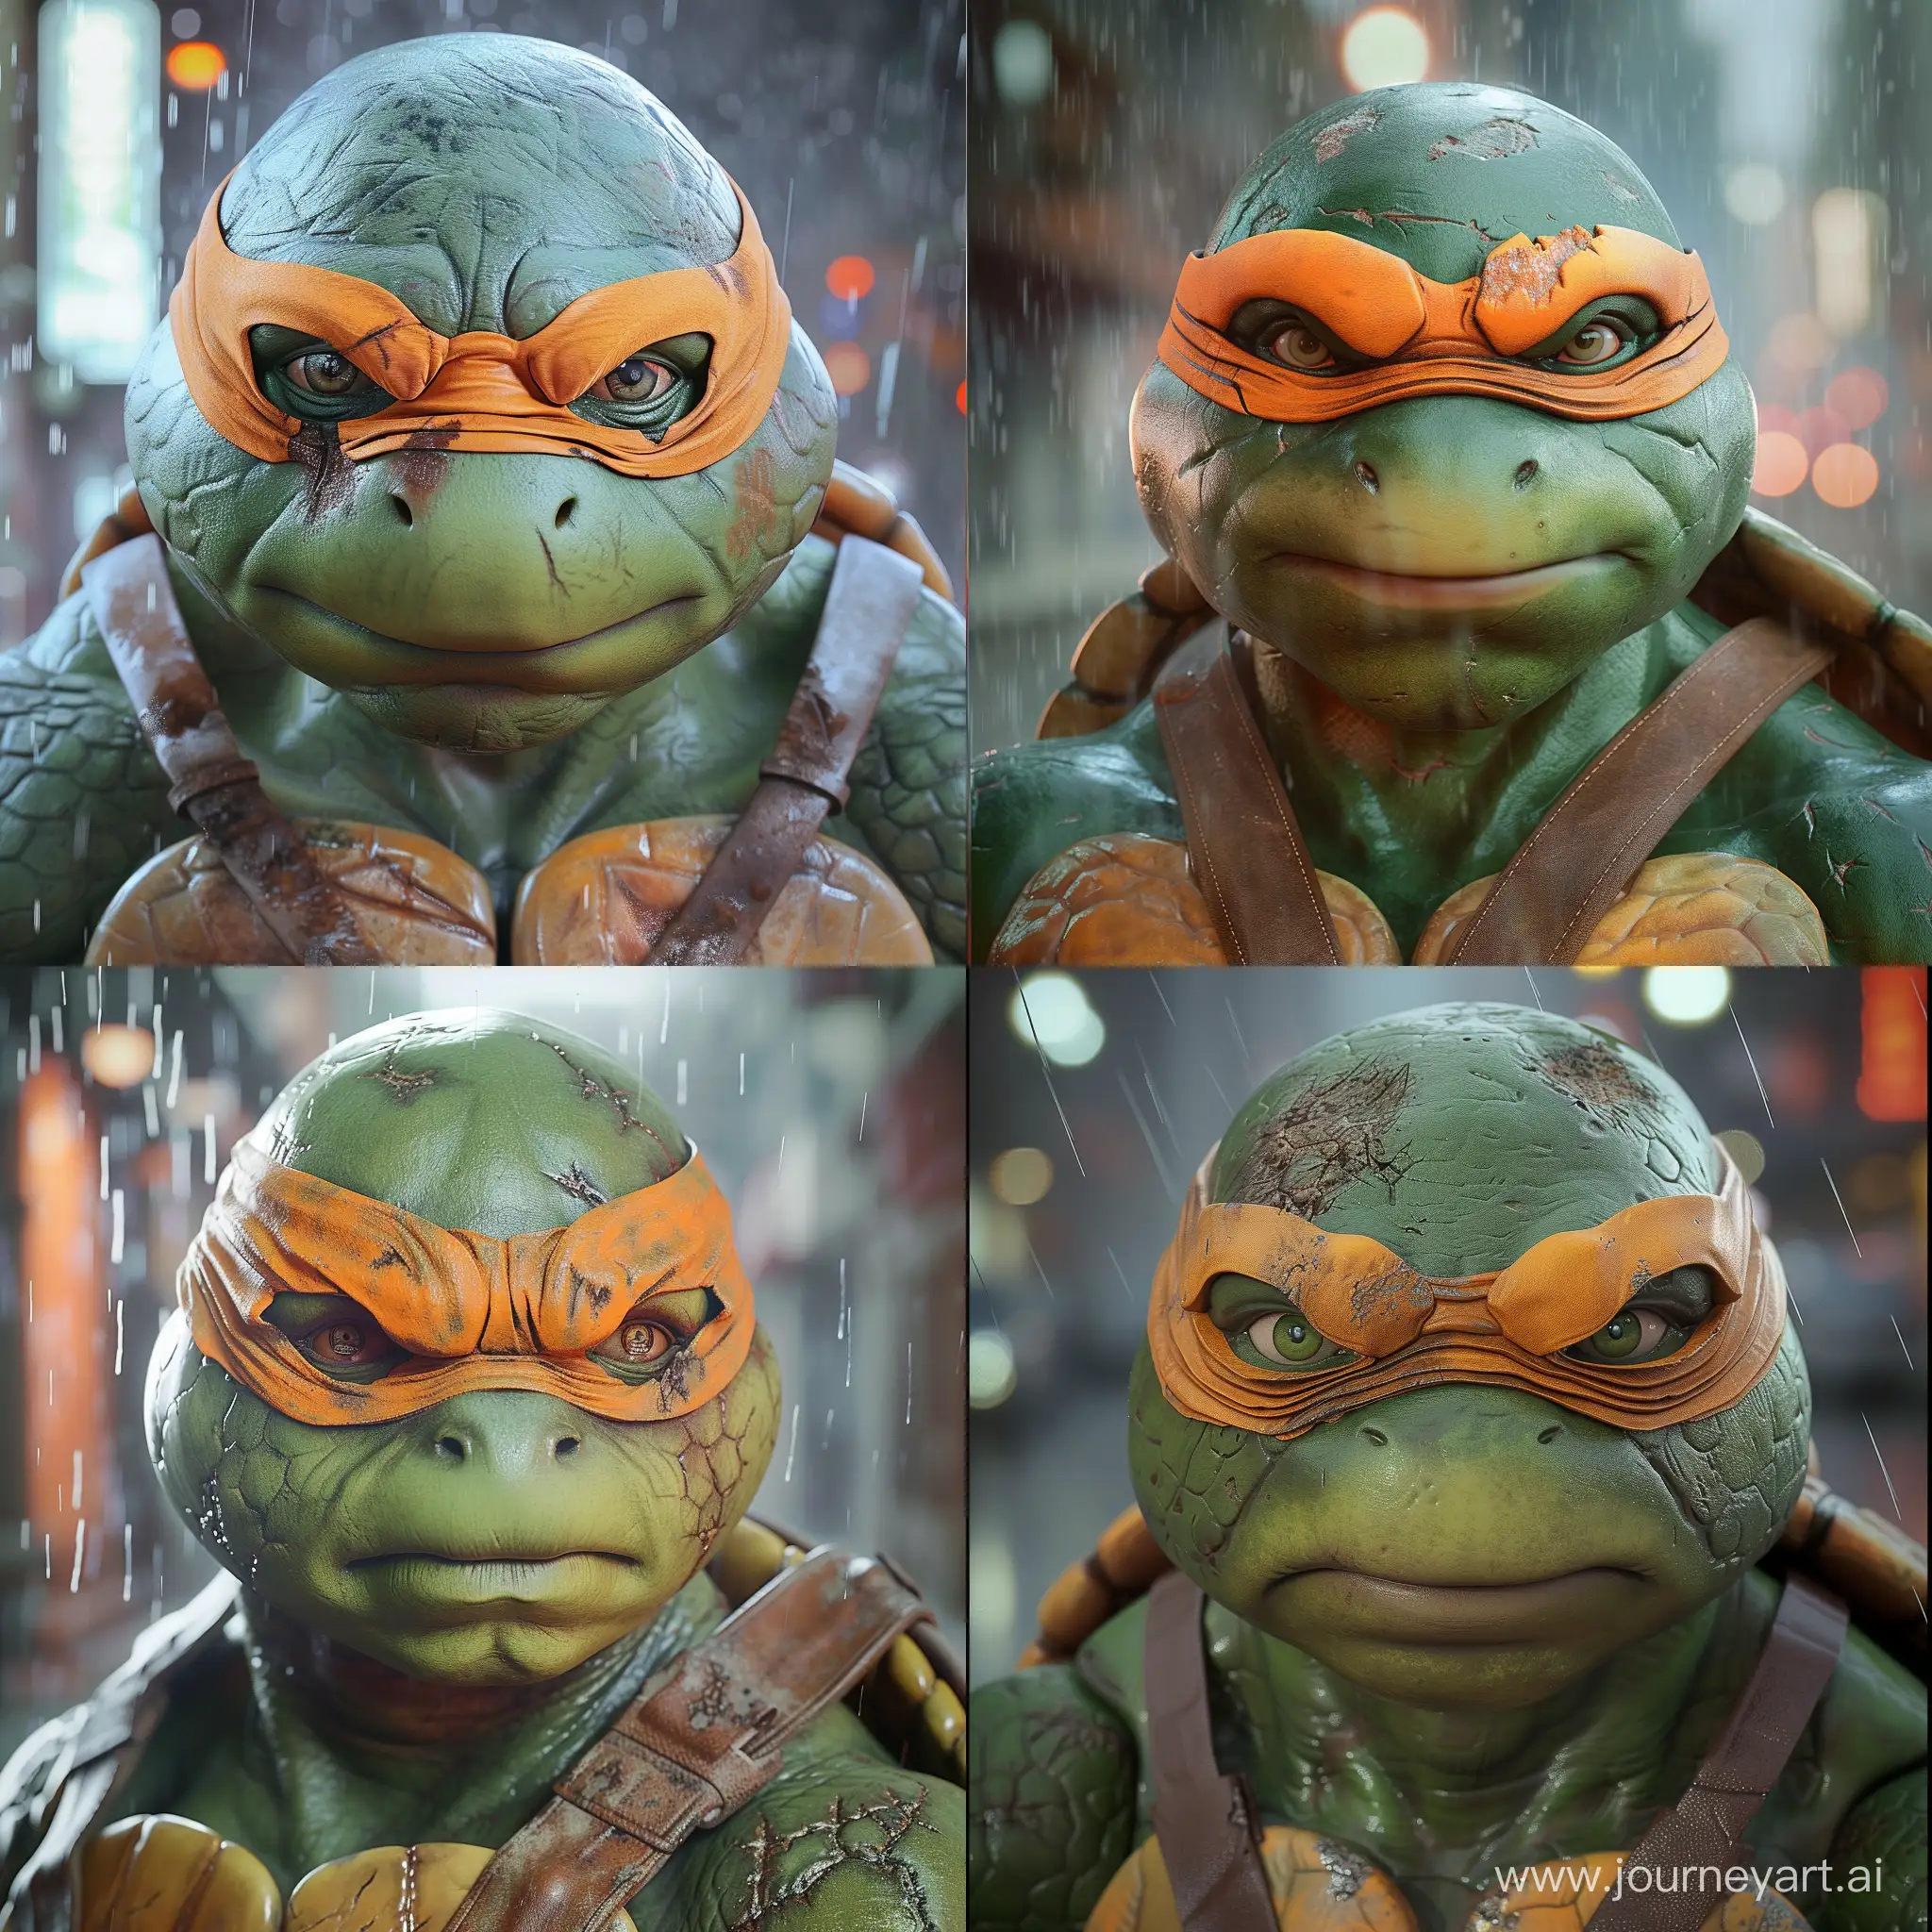 an anthropomorphic turtle character with distinct features suggesting it's from the "Teenage Mutant Ninja Turtles" franchise. The character has green skin with a rough texture, resembling the skin of a real turtle. The eyes are forward-facing, displaying a focused and somewhat stern expression.

The character wears an orange mask that covers the eyes and ties at the back of the head; this particular color of mask typically corresponds to the character Michelangelo in the franchise. There are signs of wear and battle scarring on the skin and mask, which add to the realism of the character.

Additionally, the character seems to be wearing a brown leather harness-like strap across the chest, which is part of the typical Ninja Turtle attire, often used to carry their weapons. The background is blurred, but it appears to be a dimly lit environment that could resemble a city street, and there's some rain visible in the scene, likely added for atmospheric effect.

The image is a high-quality, realistic rendition of the character, possibly from a live-action movie, a high-end collectible figure, or a detailed computer-generated illustration --v 6